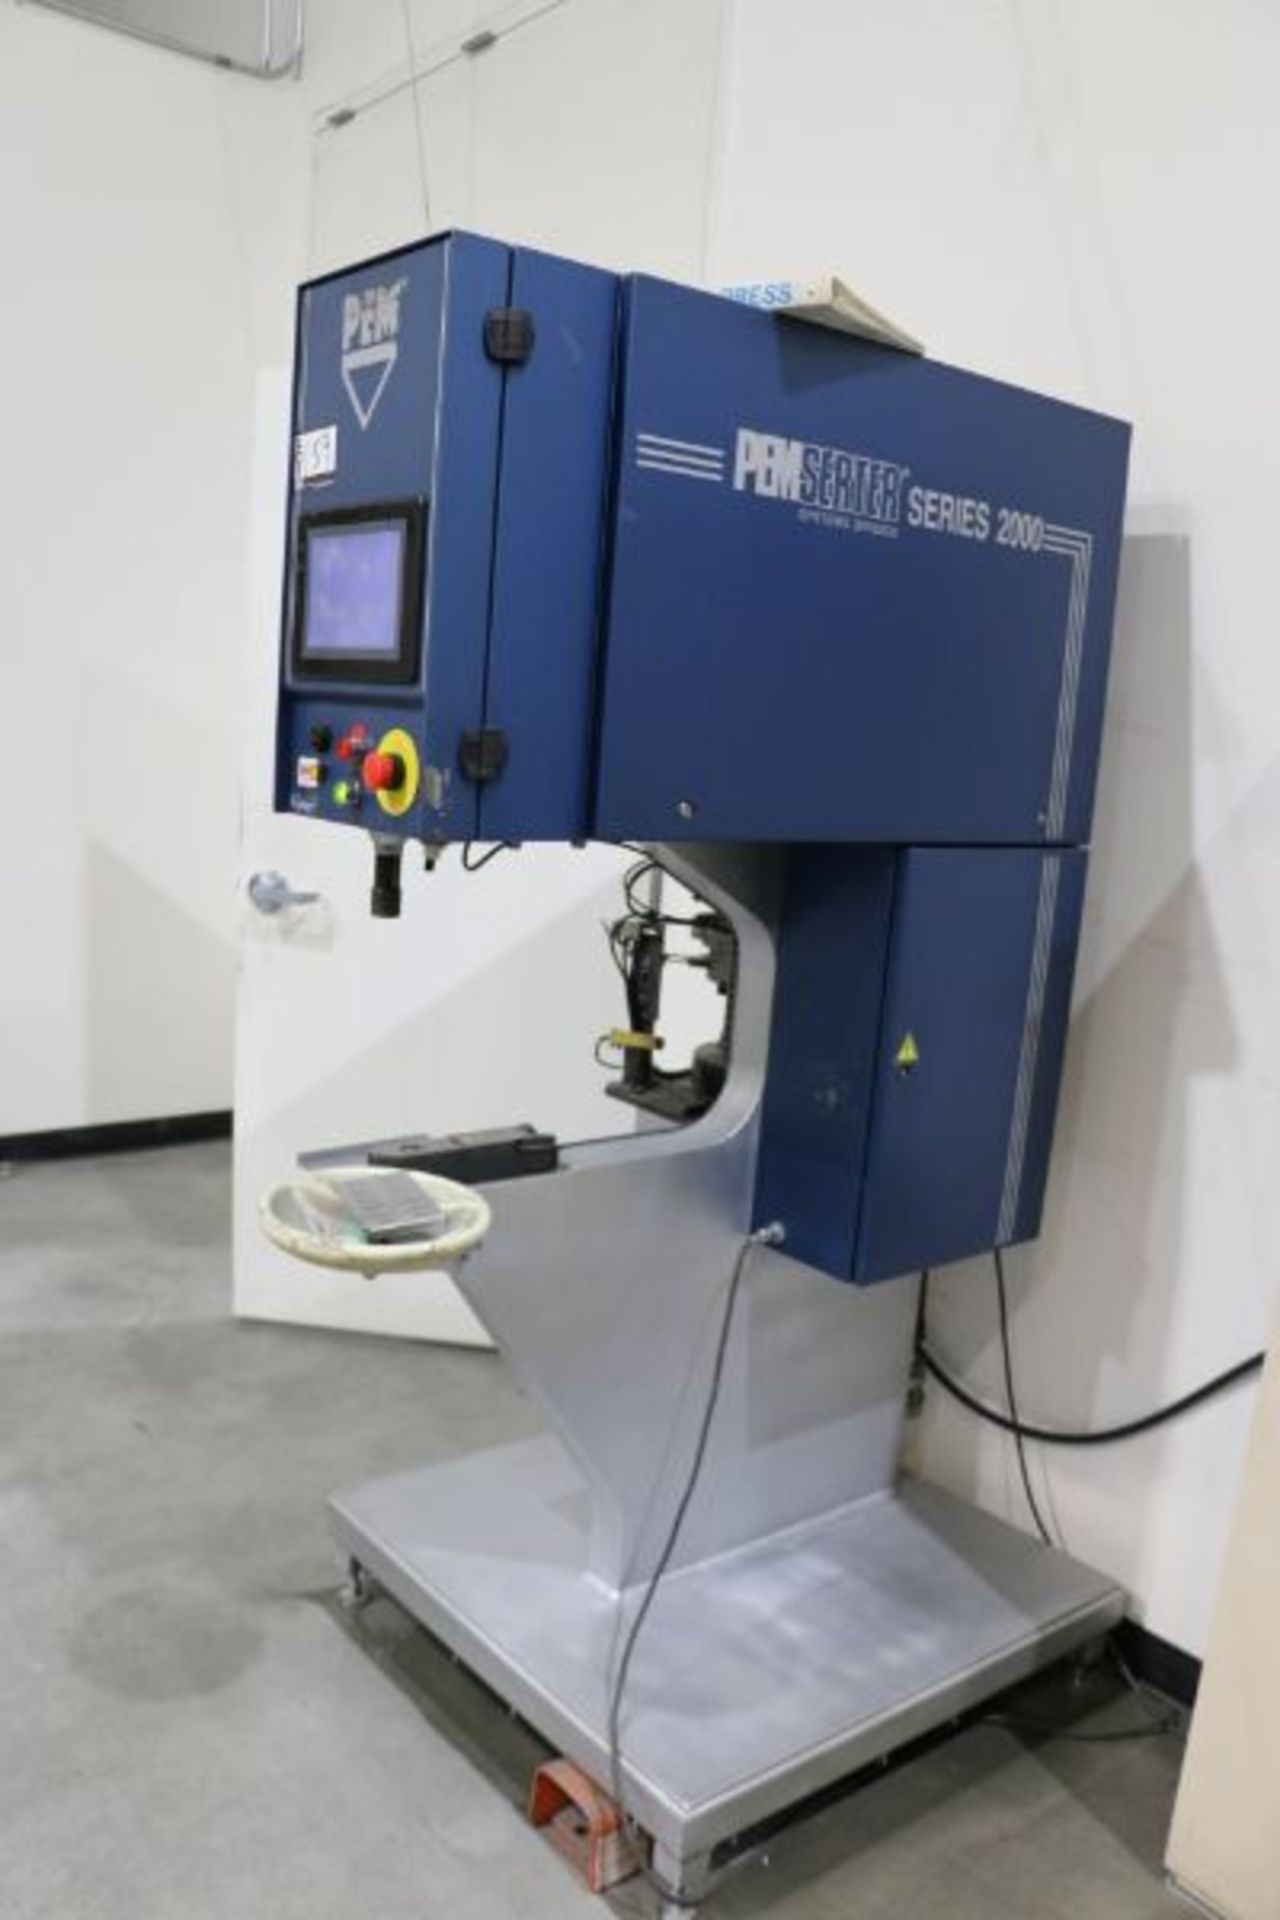 PEMSERTER Series 2000 Insertion Press, s/n 2017A-643, New 2000 - Image 4 of 6